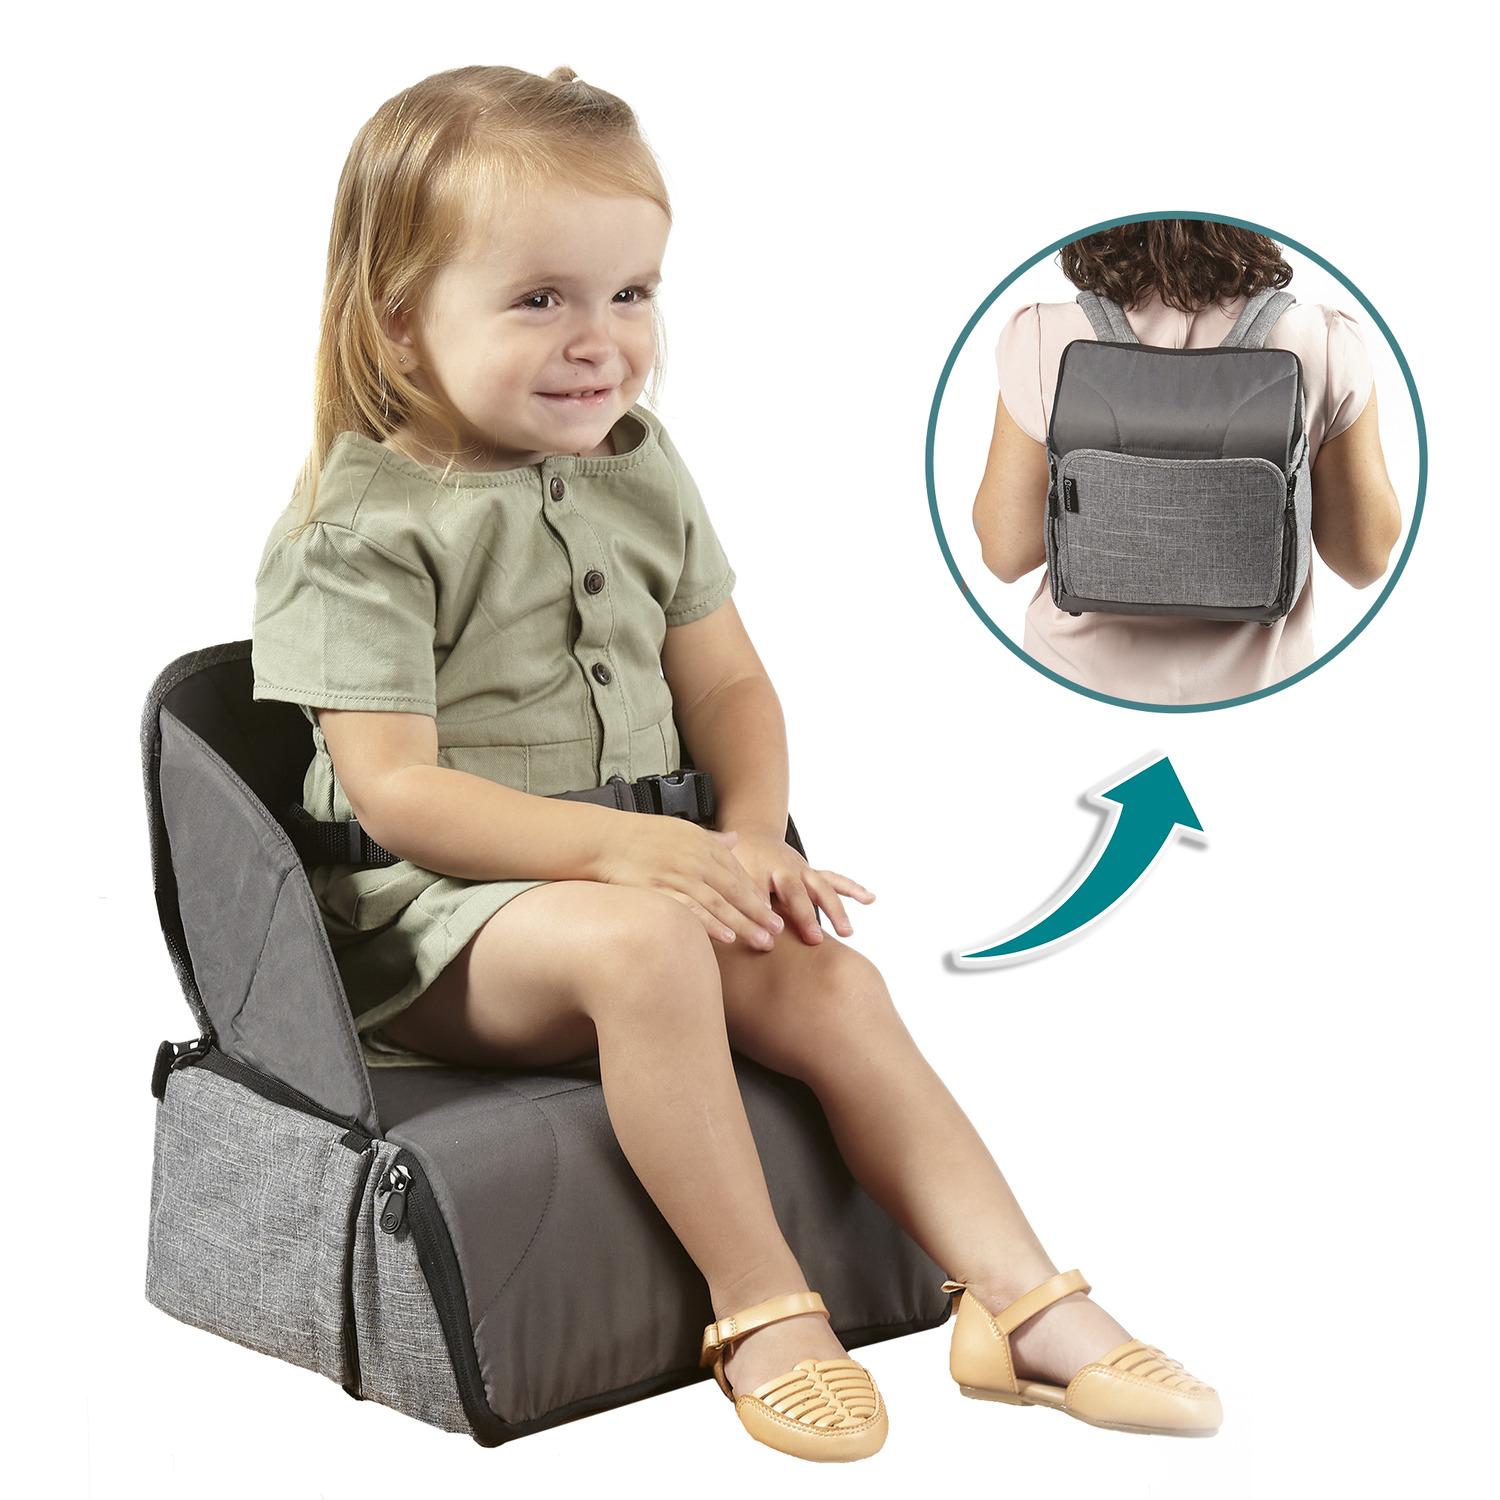 Portable Booster Seat Diaper Bag Feeding Backpack Lightweight Travel Contours